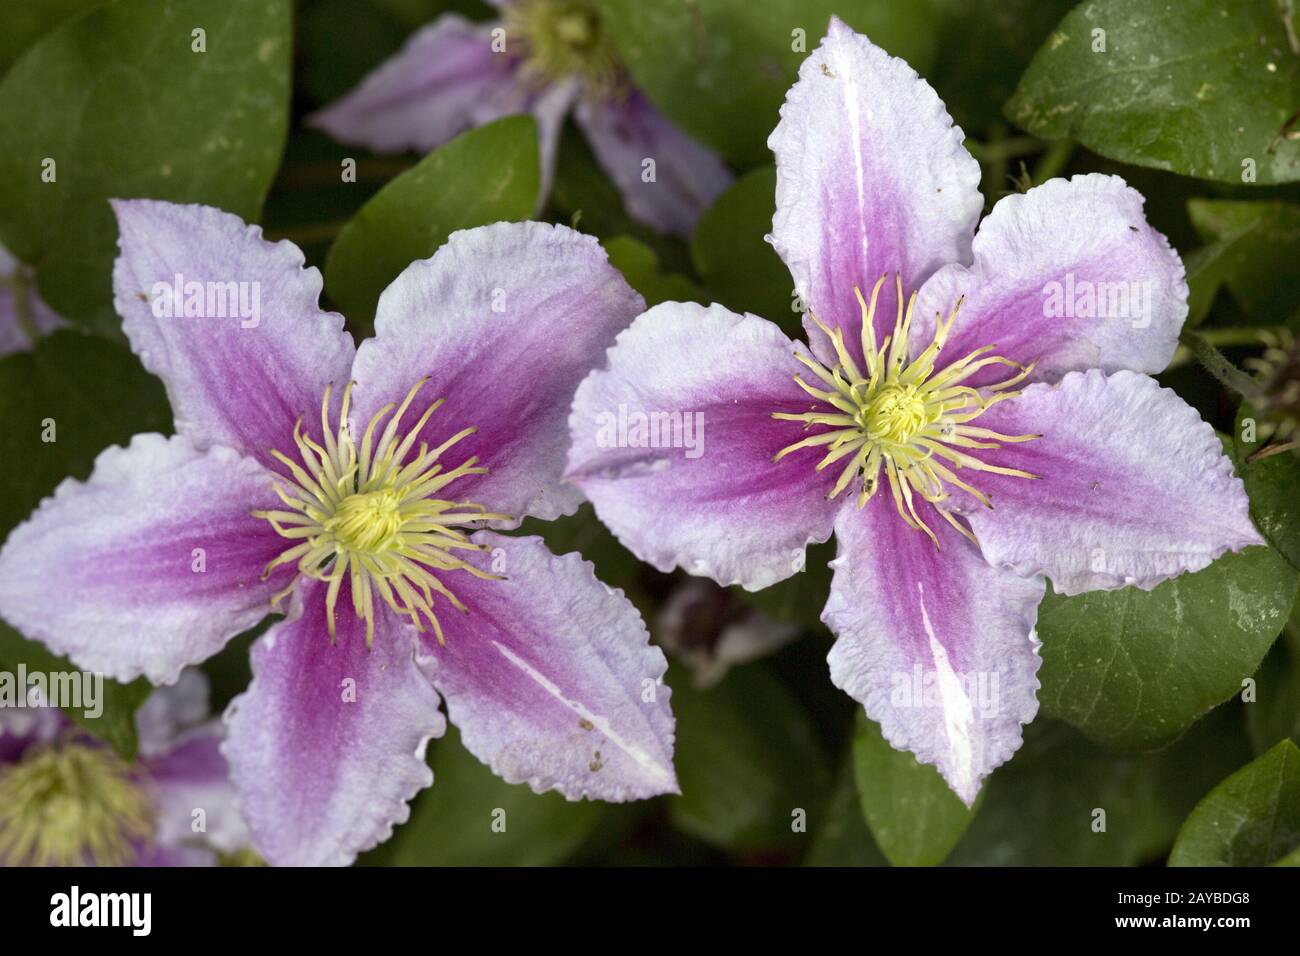 pink flowers of a clematis hybrid Stock Photo